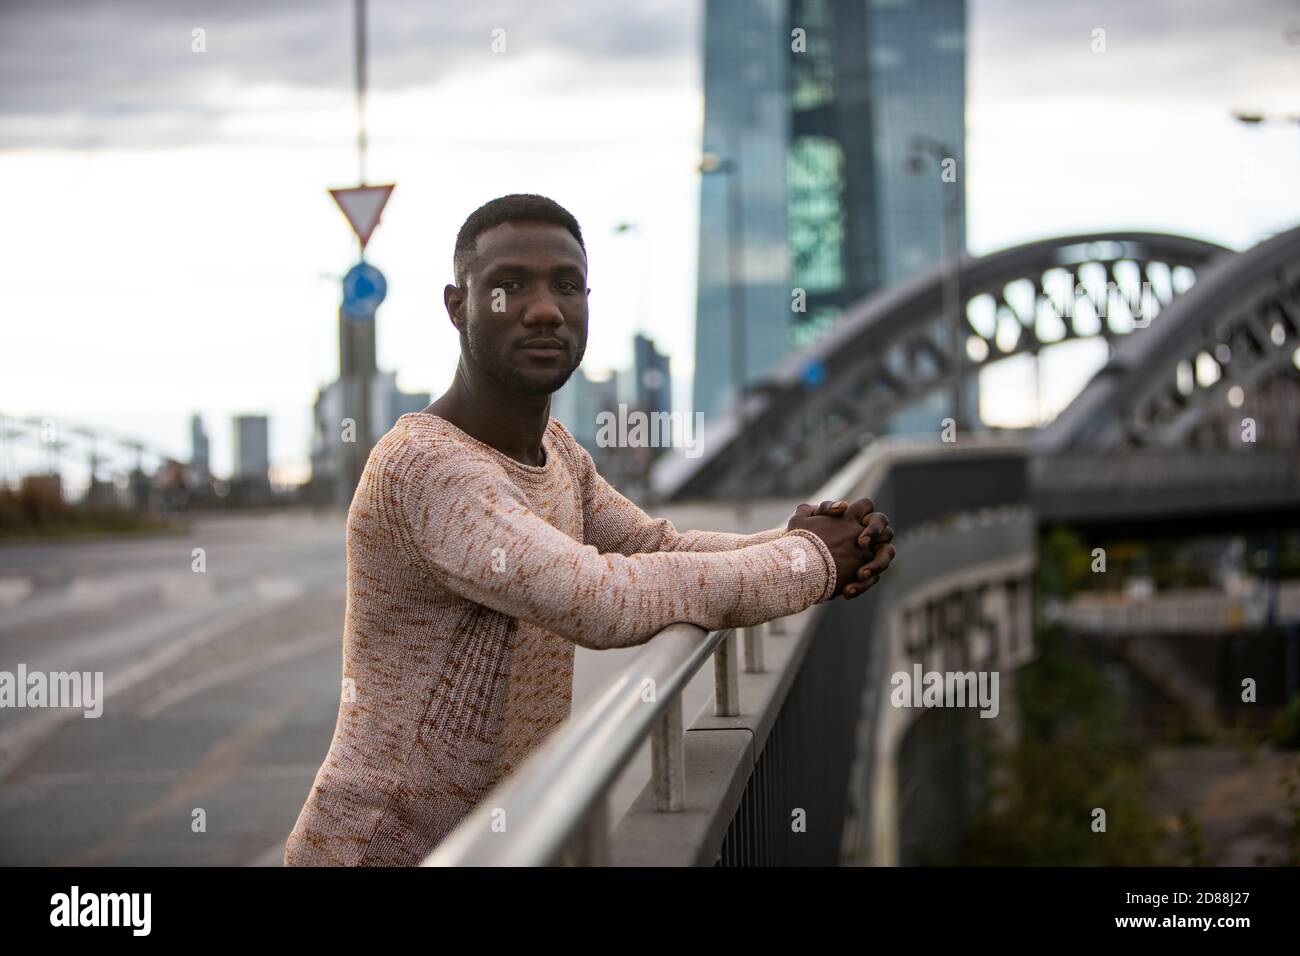 Man standing on bridge leaning arms on railing and looking at camera. Medium shot. City background. Stock Photo